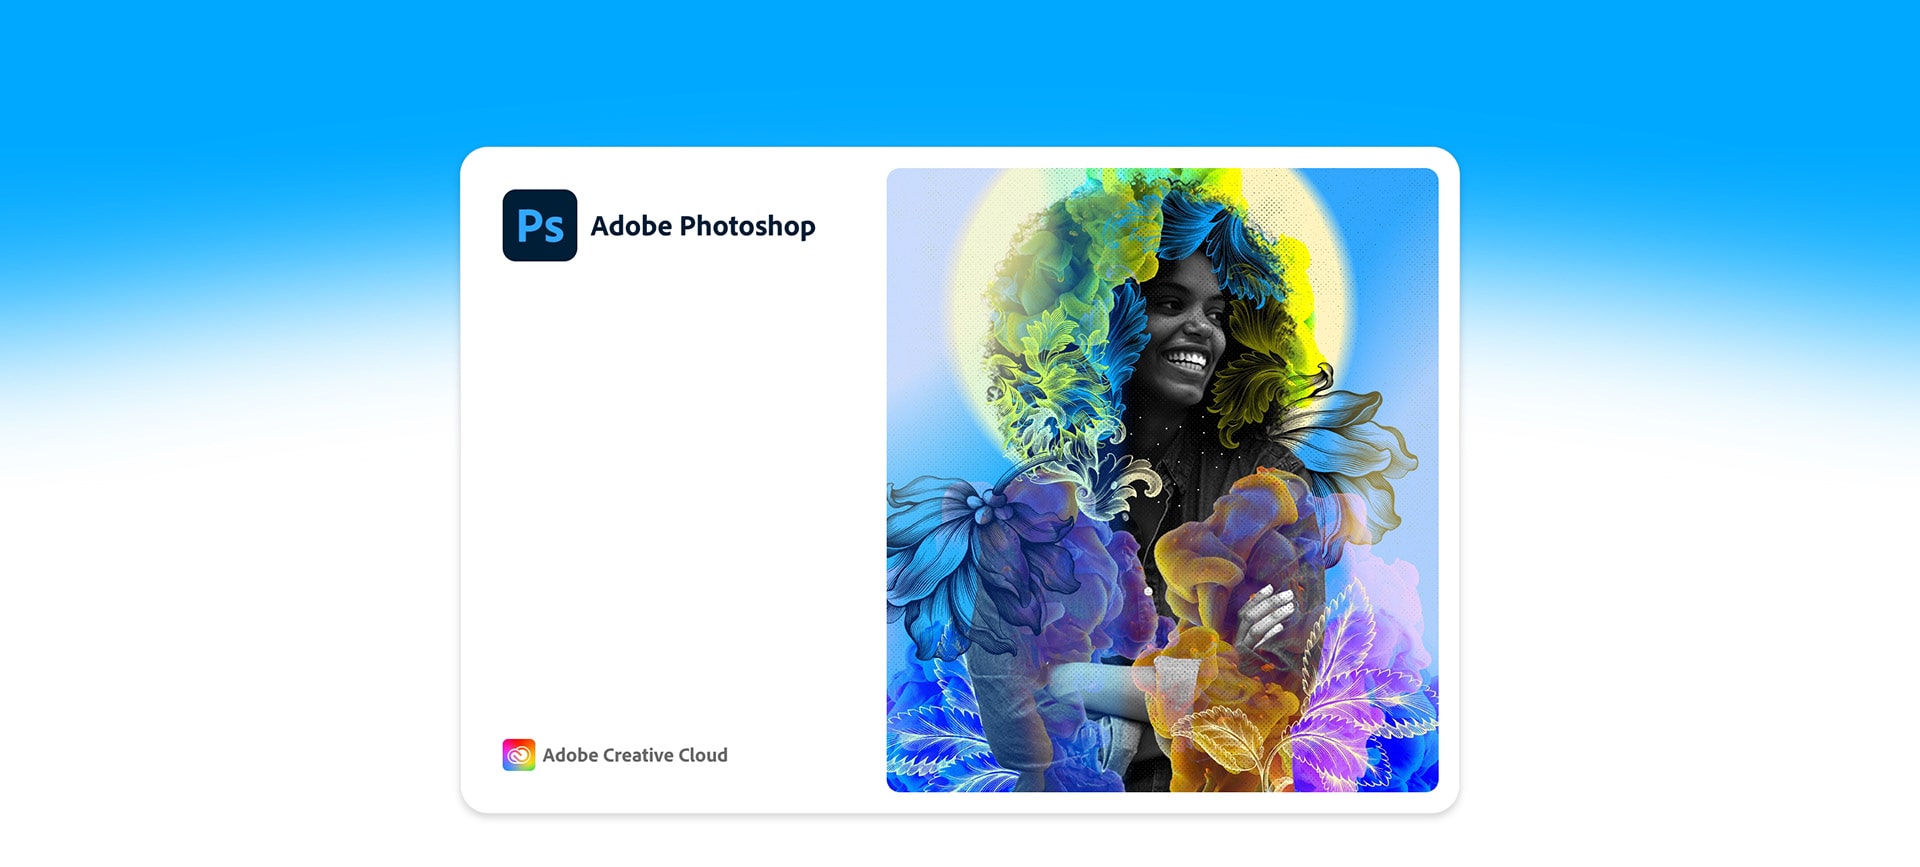 adobe photoshop activated free download